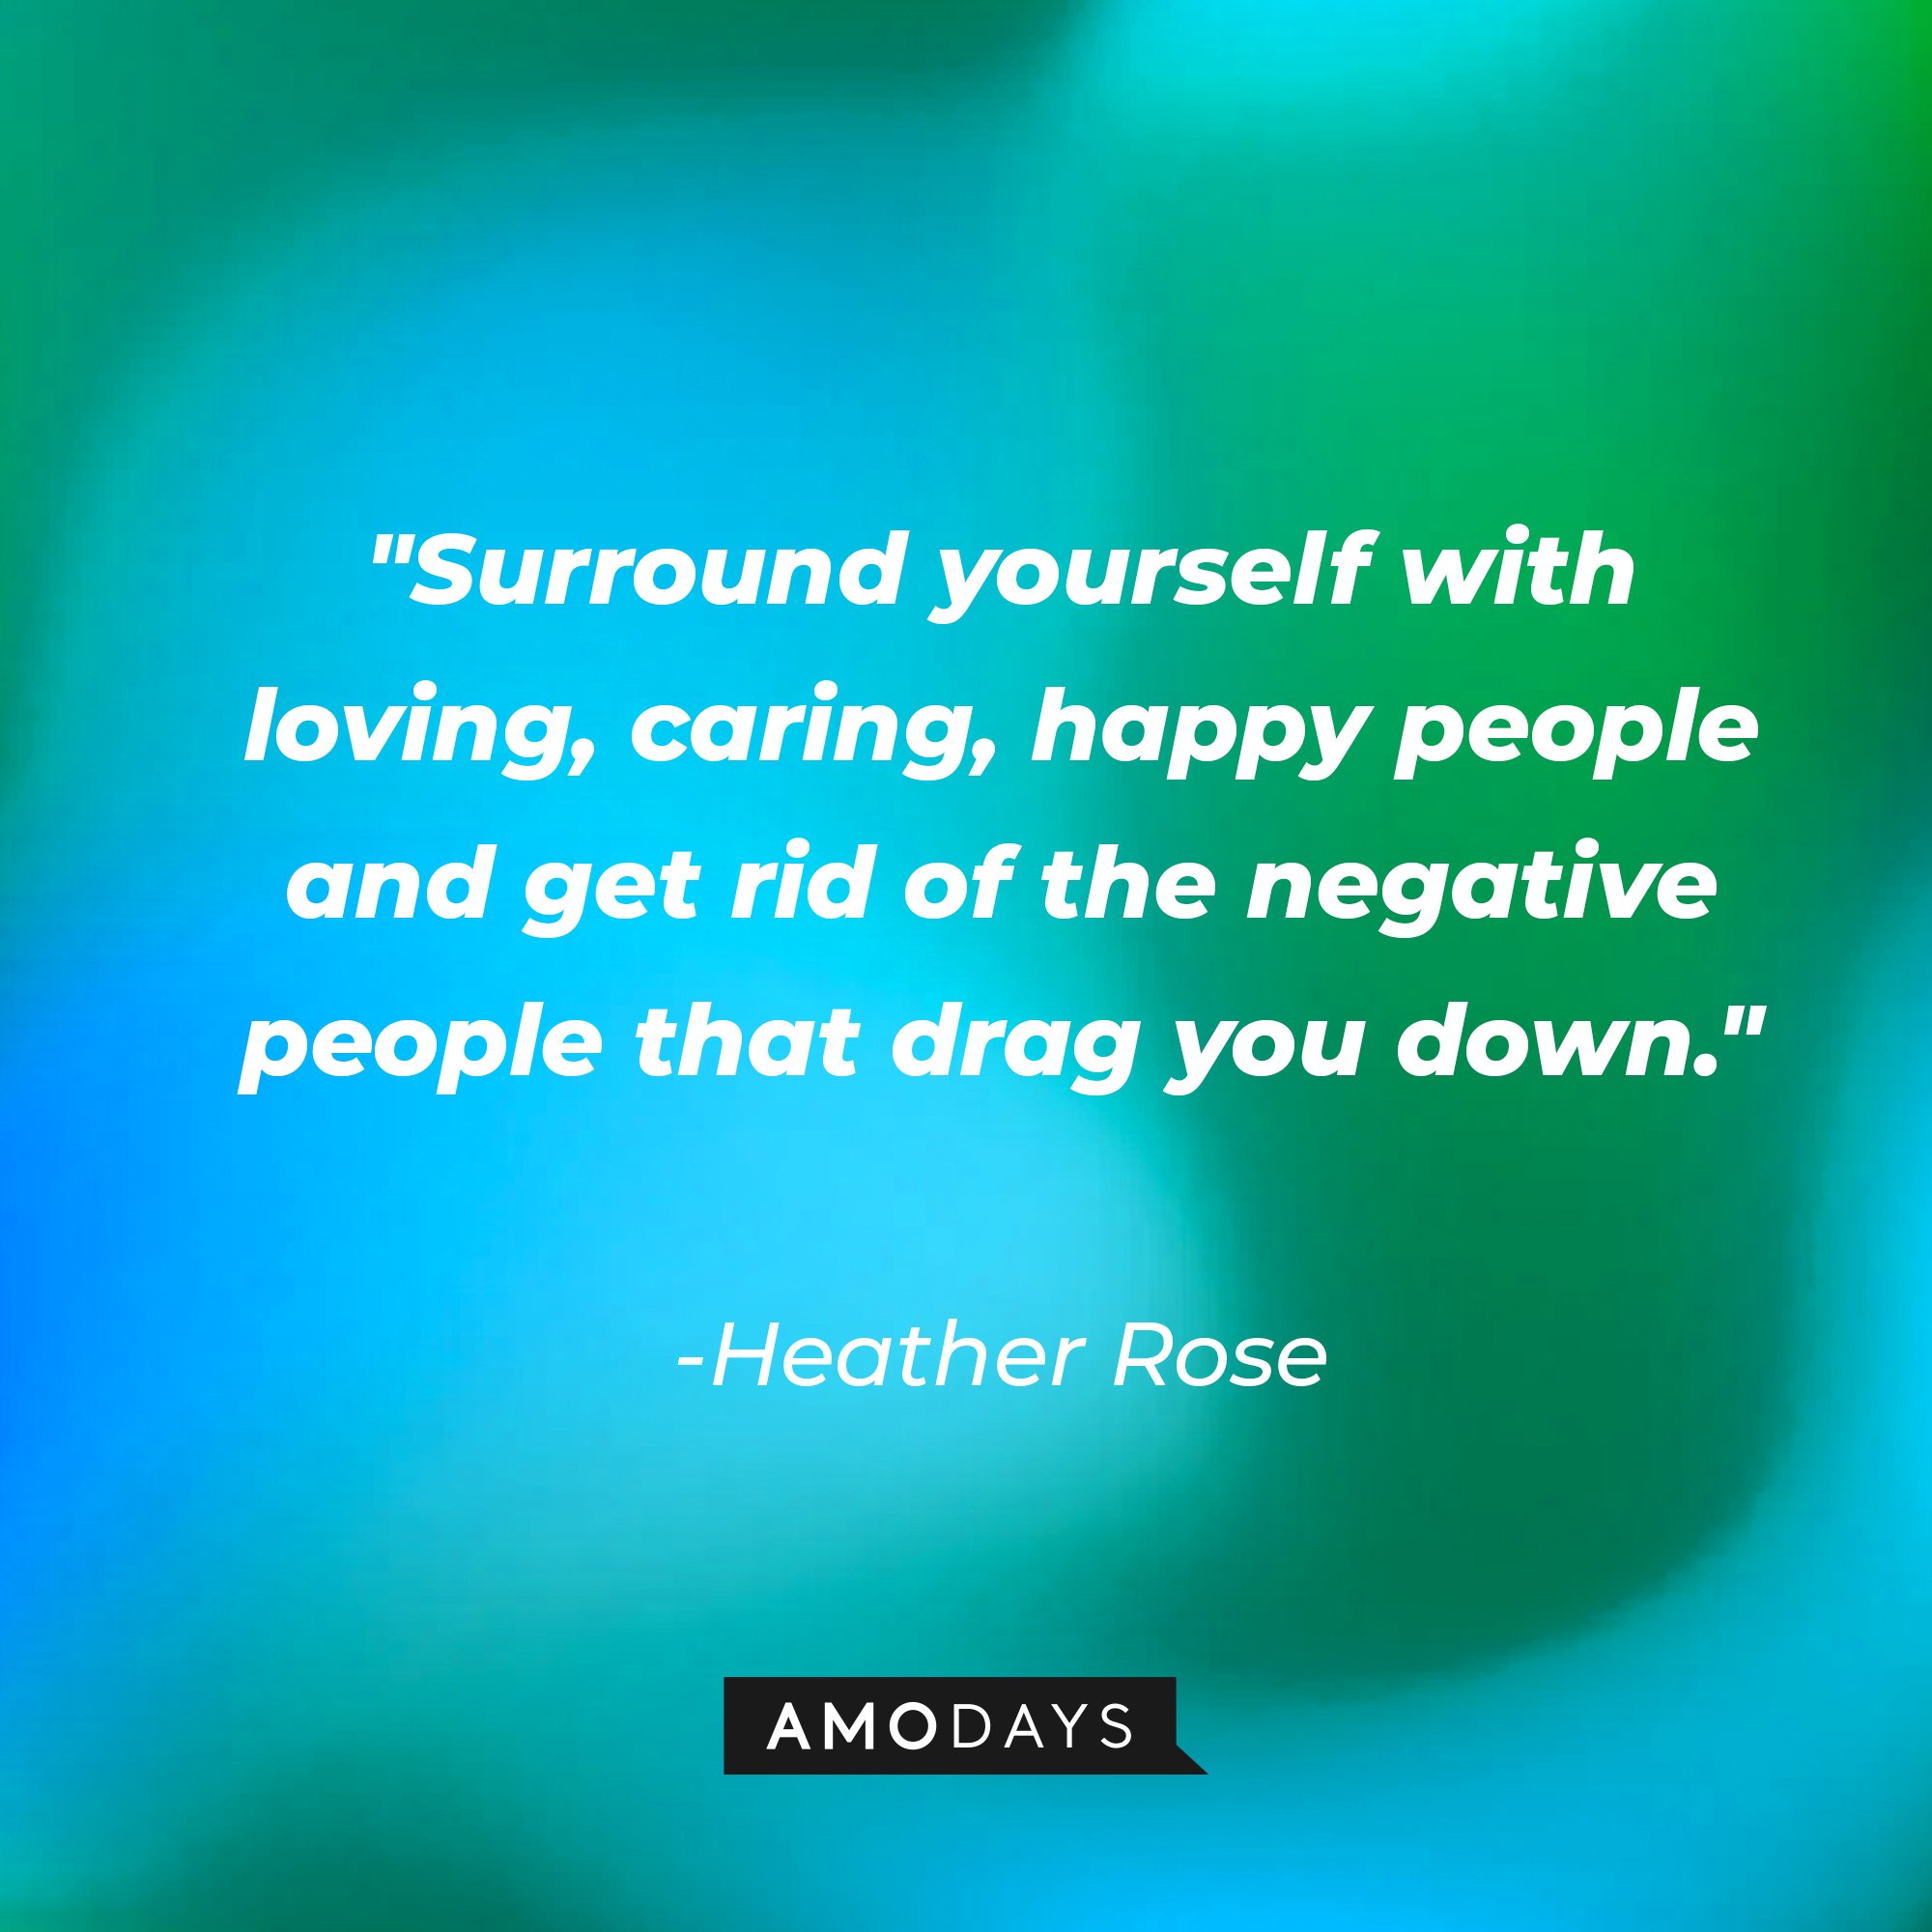 Heather Rose’s quote: "Surround yourself with loving, caring, happy people and get rid of the negative people that drag you down." | Image: AmoDays